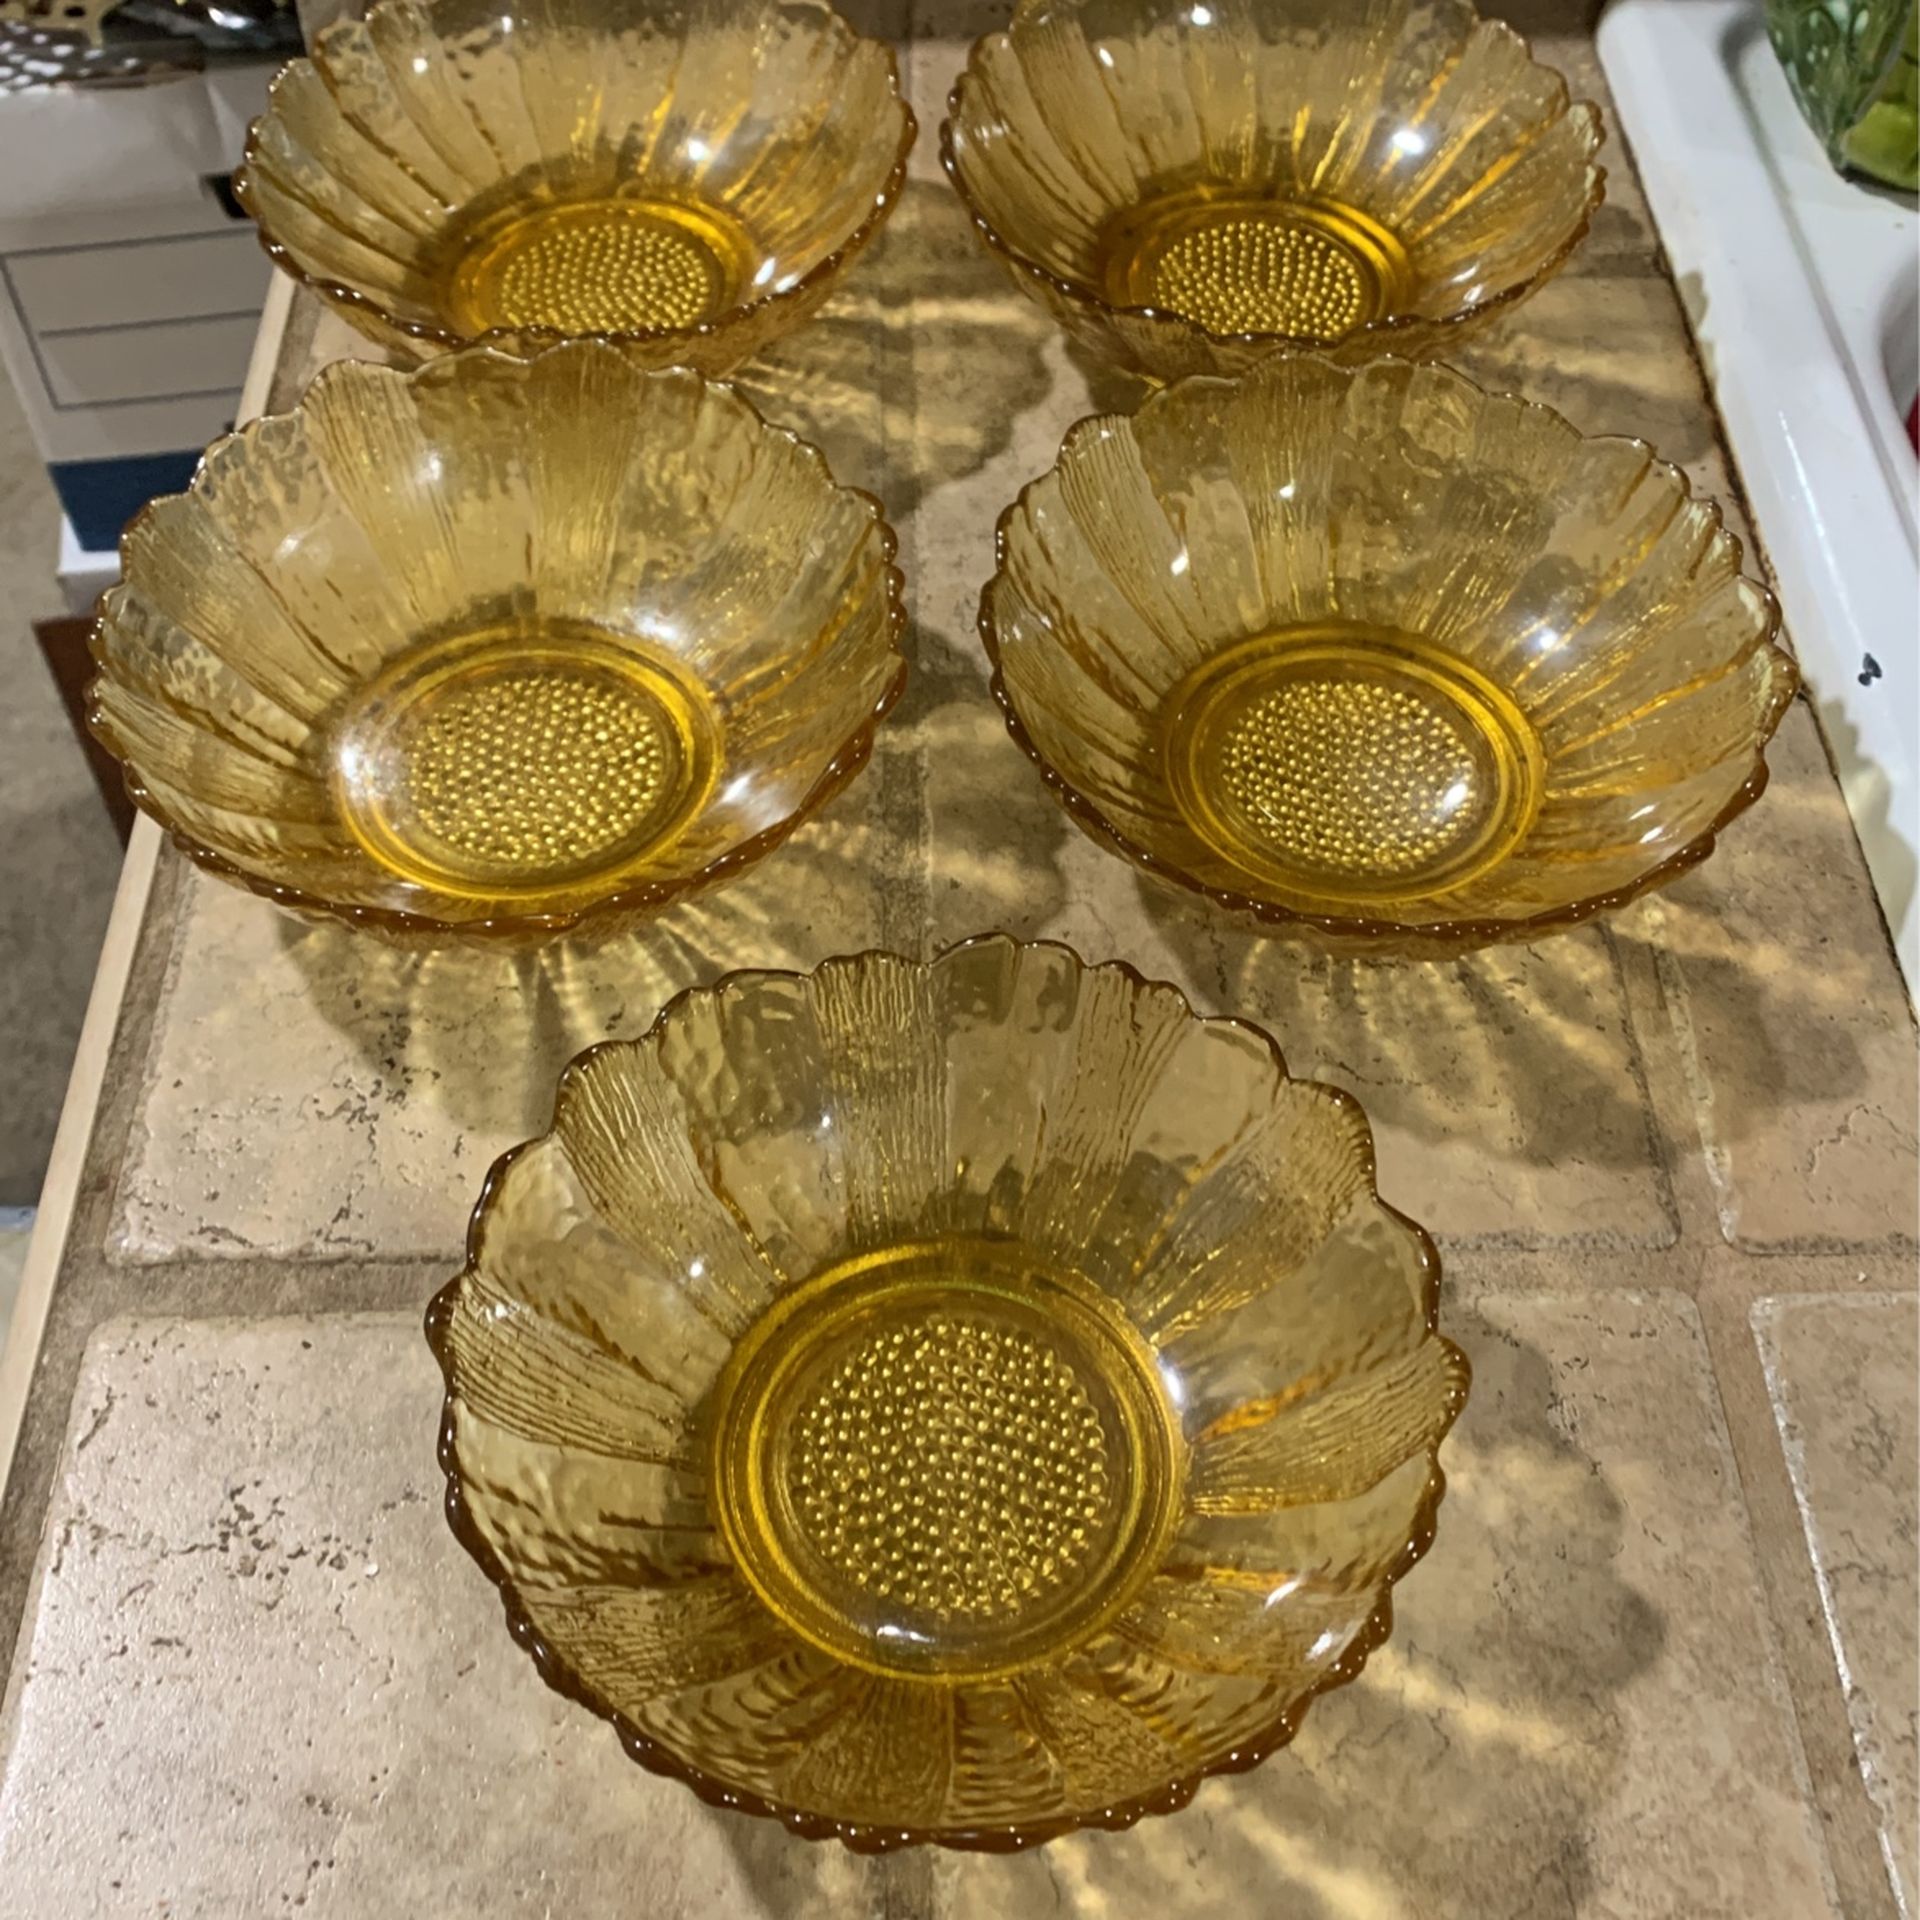 5 Vintage 1960's Indiana Glass Bowls- Amber Sunflower Mid Century Bowls 6.5”